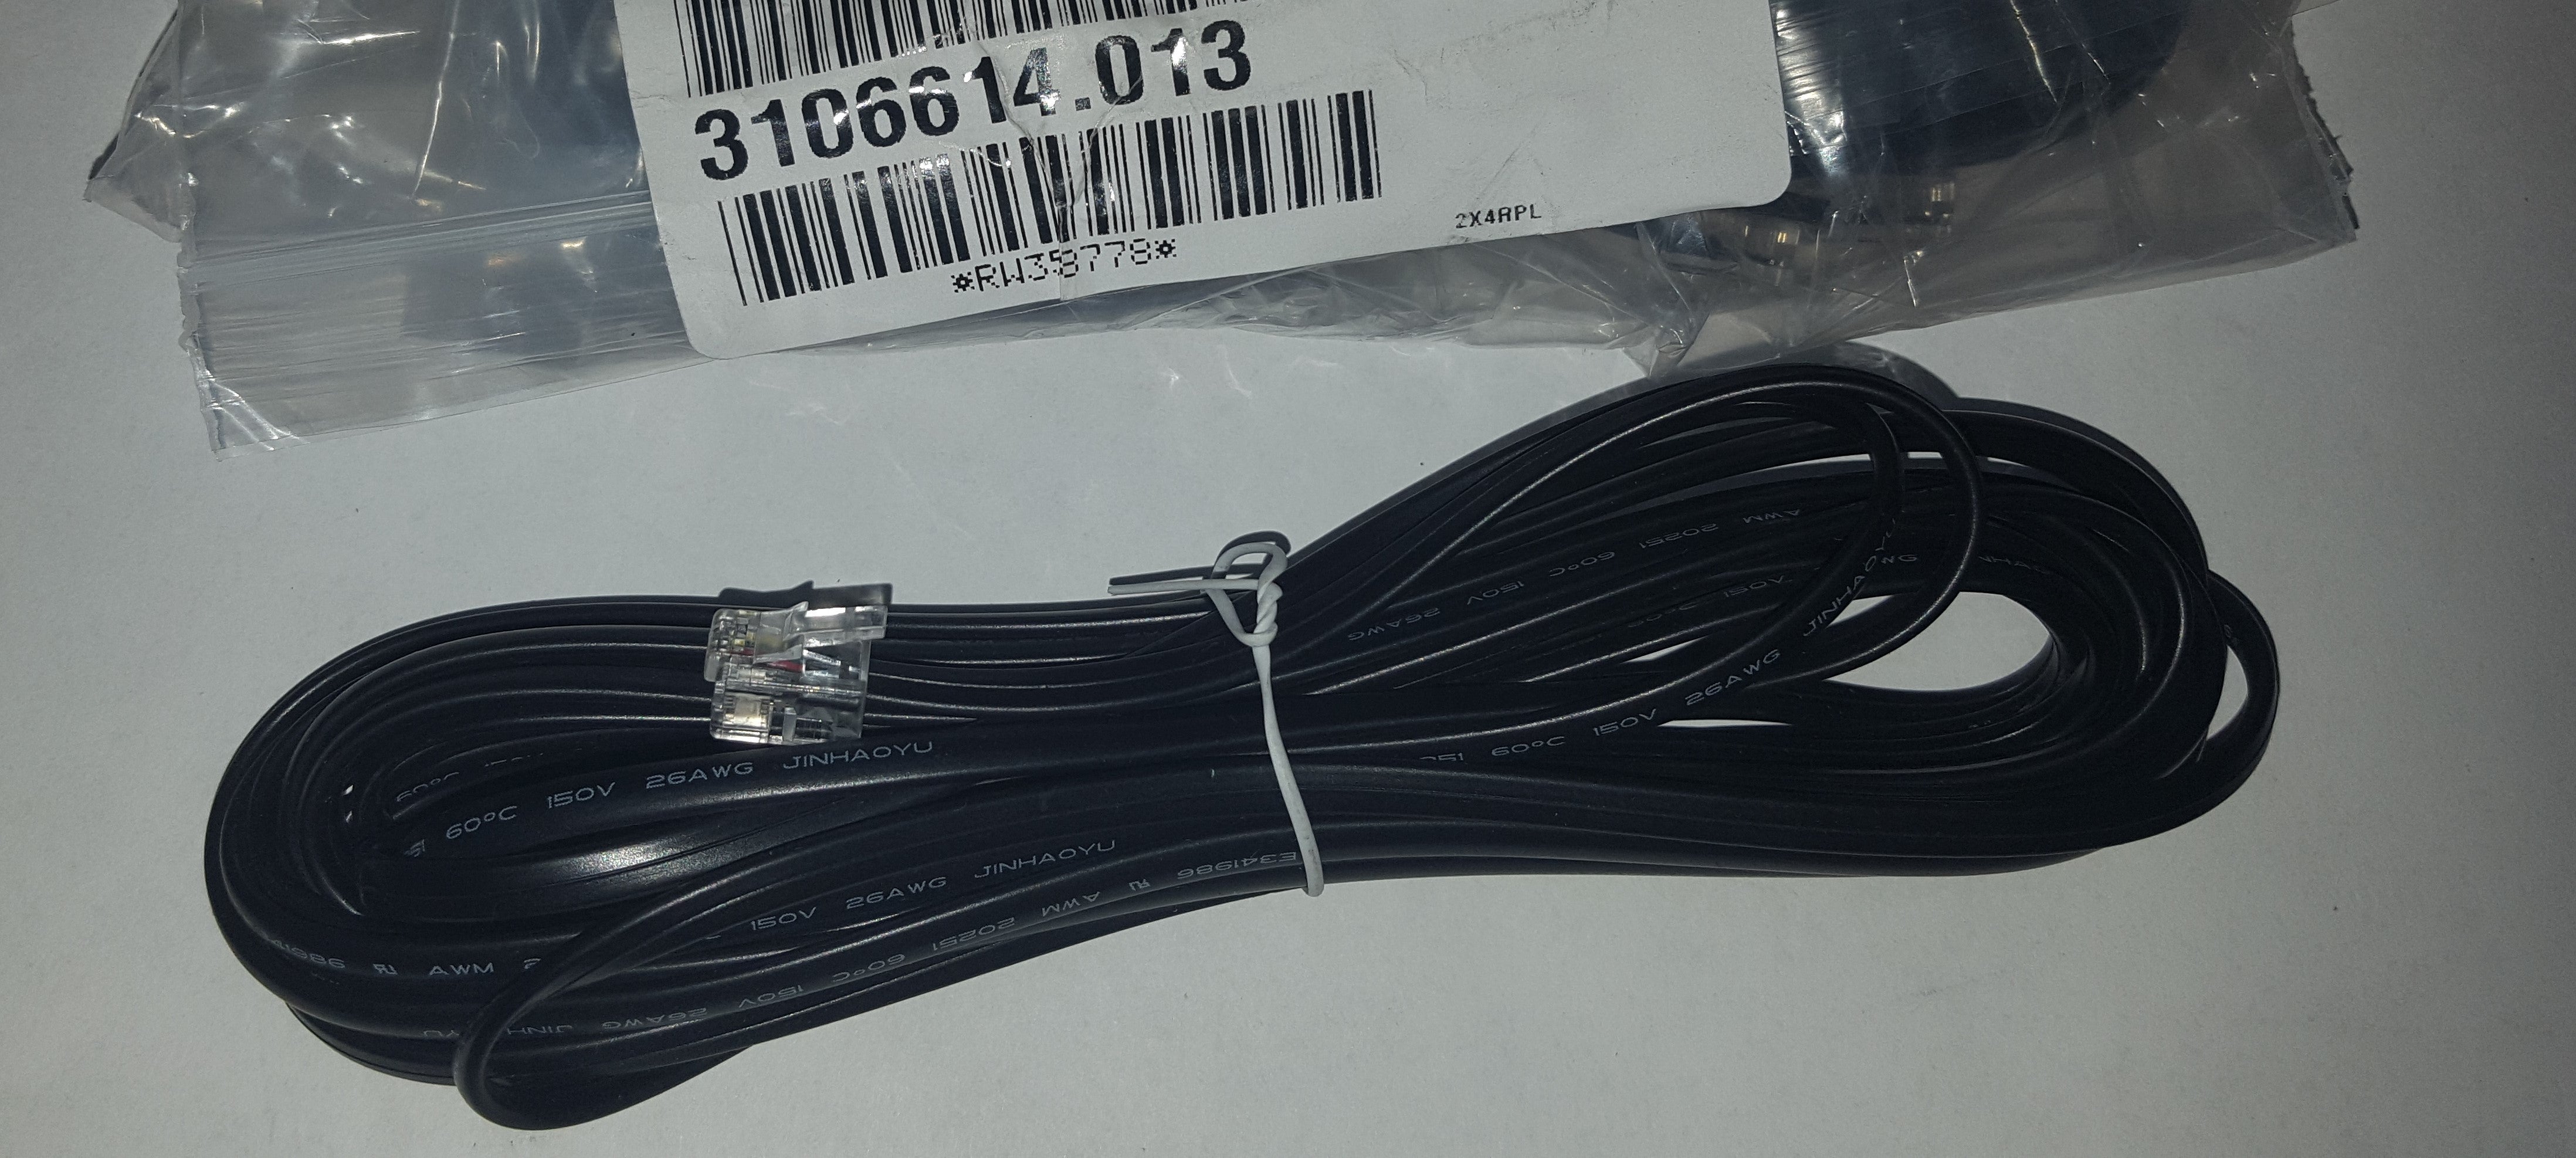 Dometic™ 3106614.013 OEM RV Air Conditioner Communication Data Cable - 18